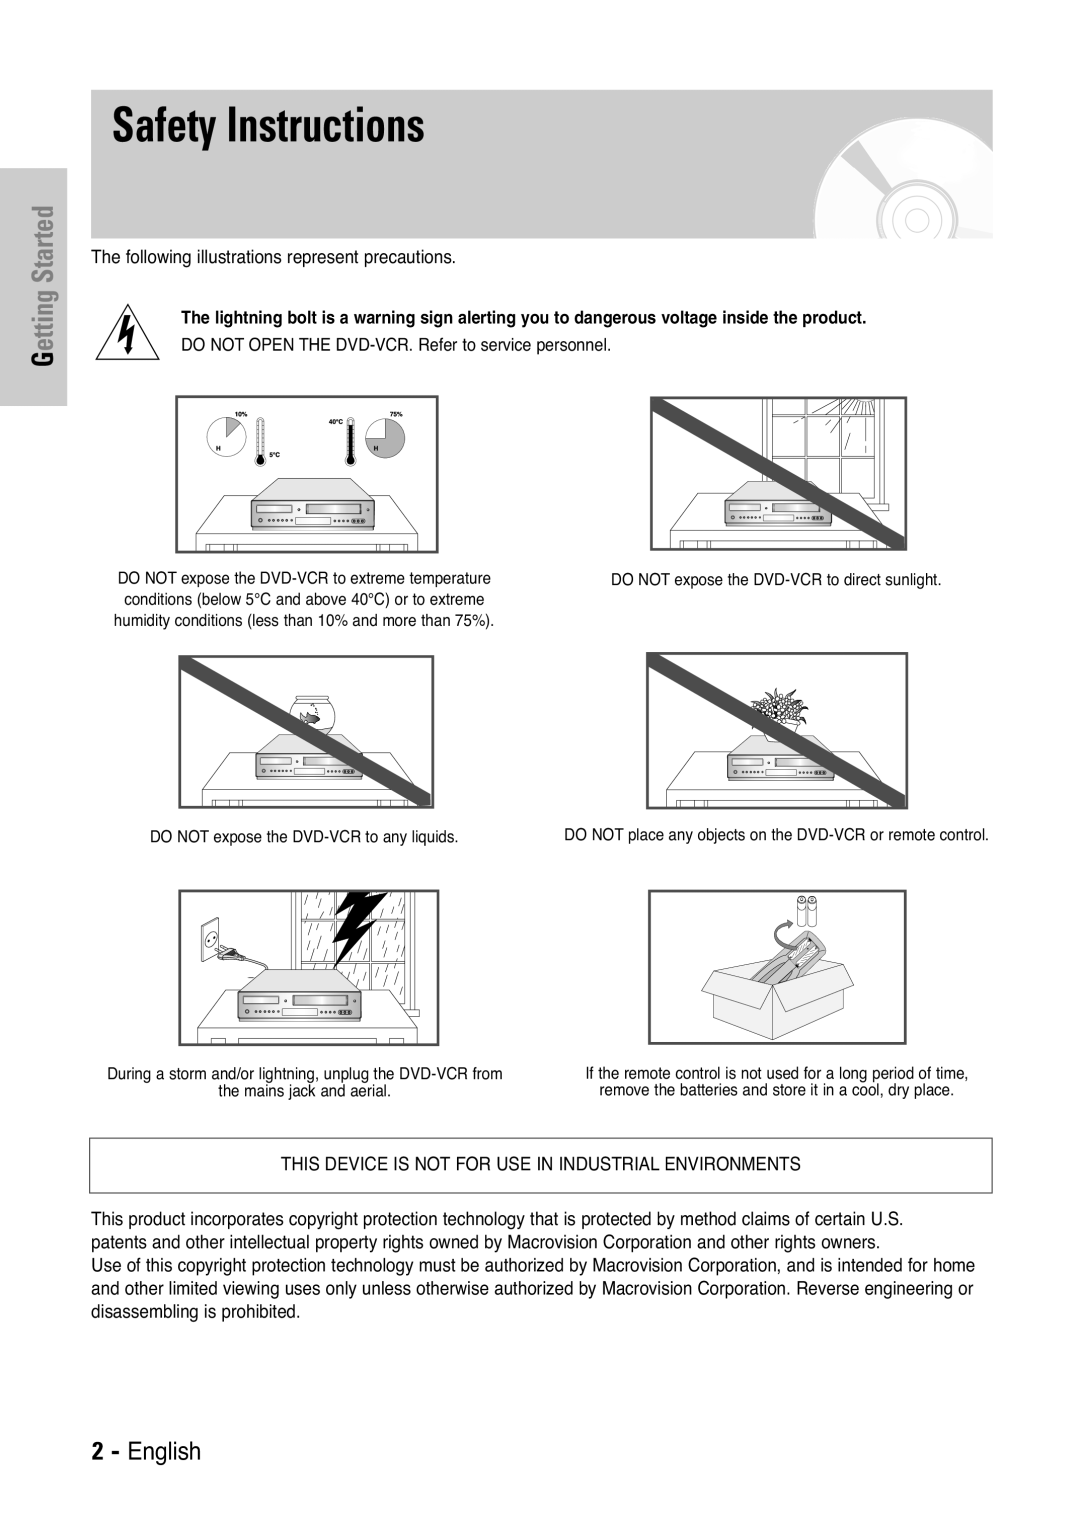 Samsung V7000K, V6500K Safety Instructions, Getting Started, English, The following illustrations represent precautions 